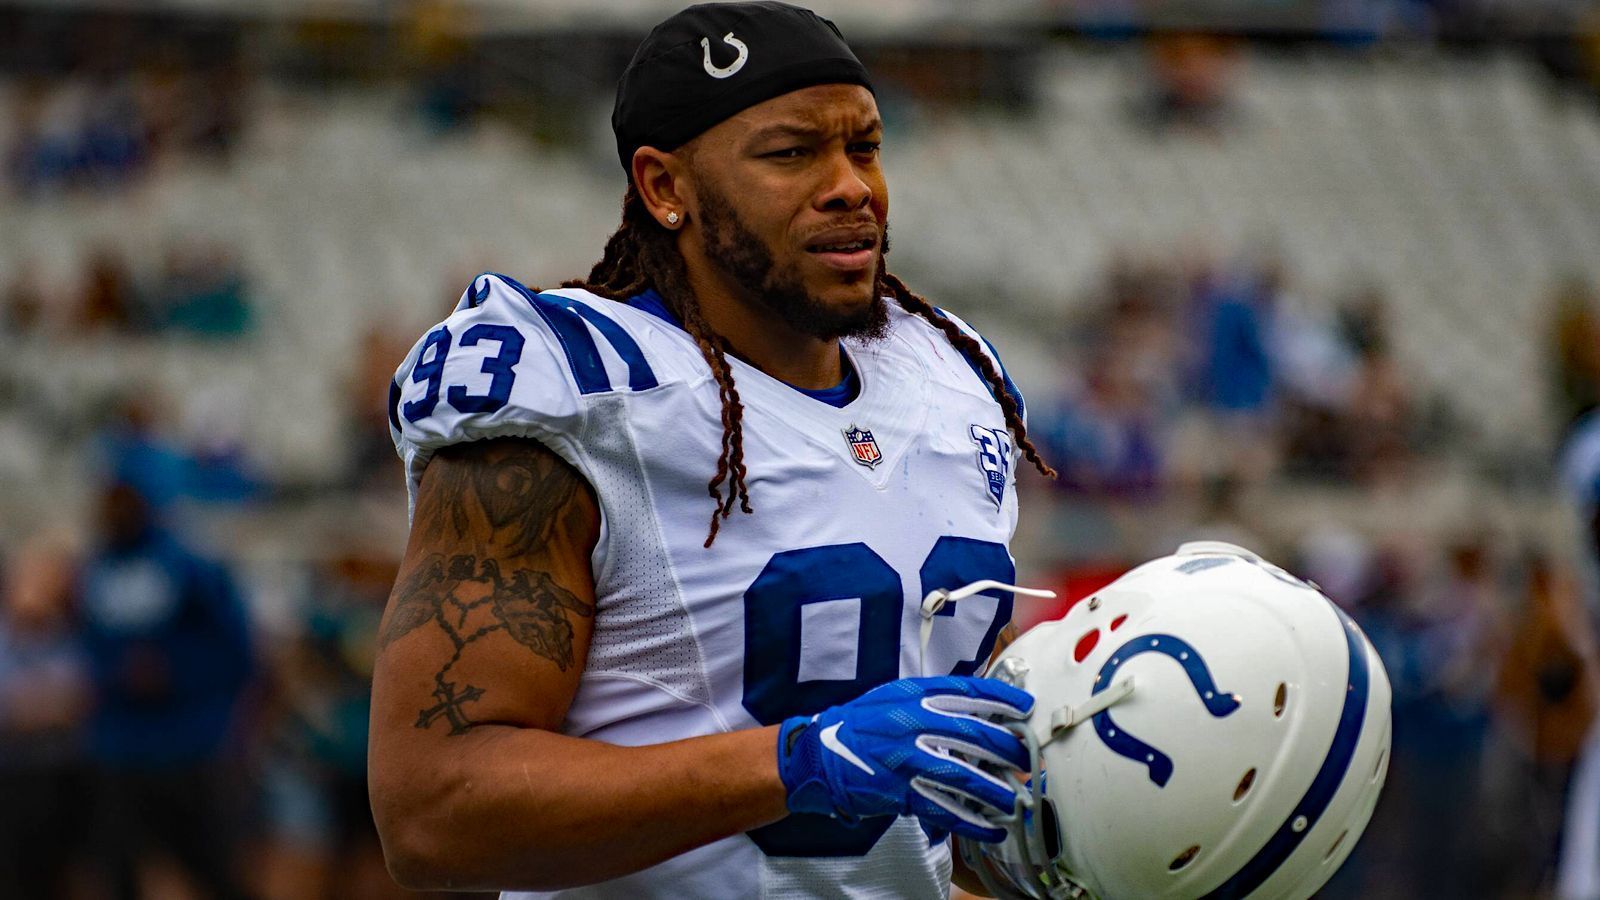 
                <strong>Indianapolis Colts: Jabaal Sheard</strong><br>
                Position: Defensive End
              